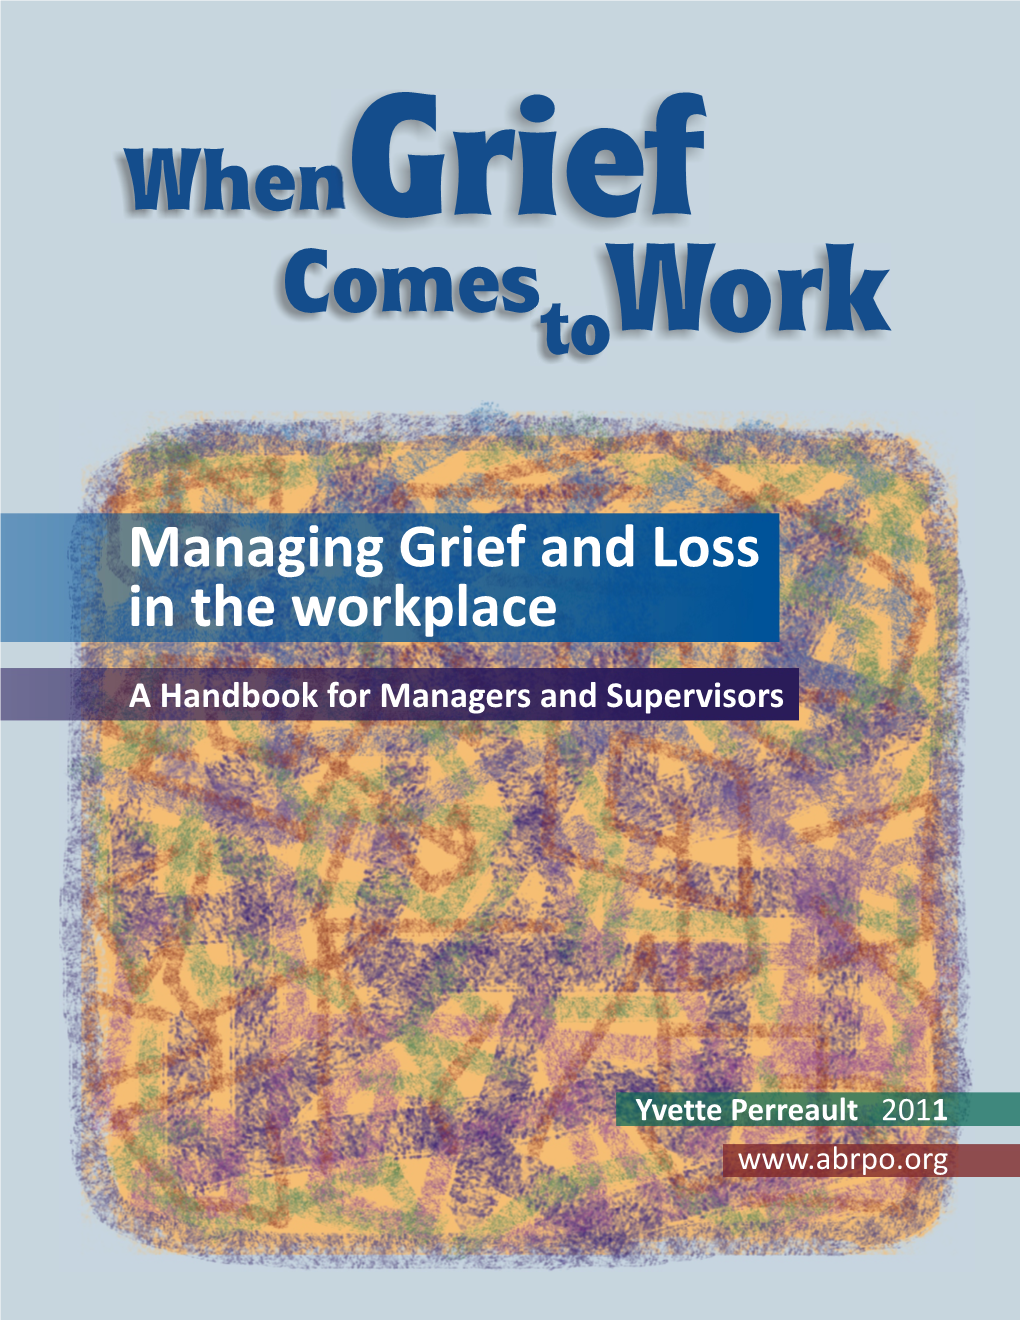 When Grief Comes Work